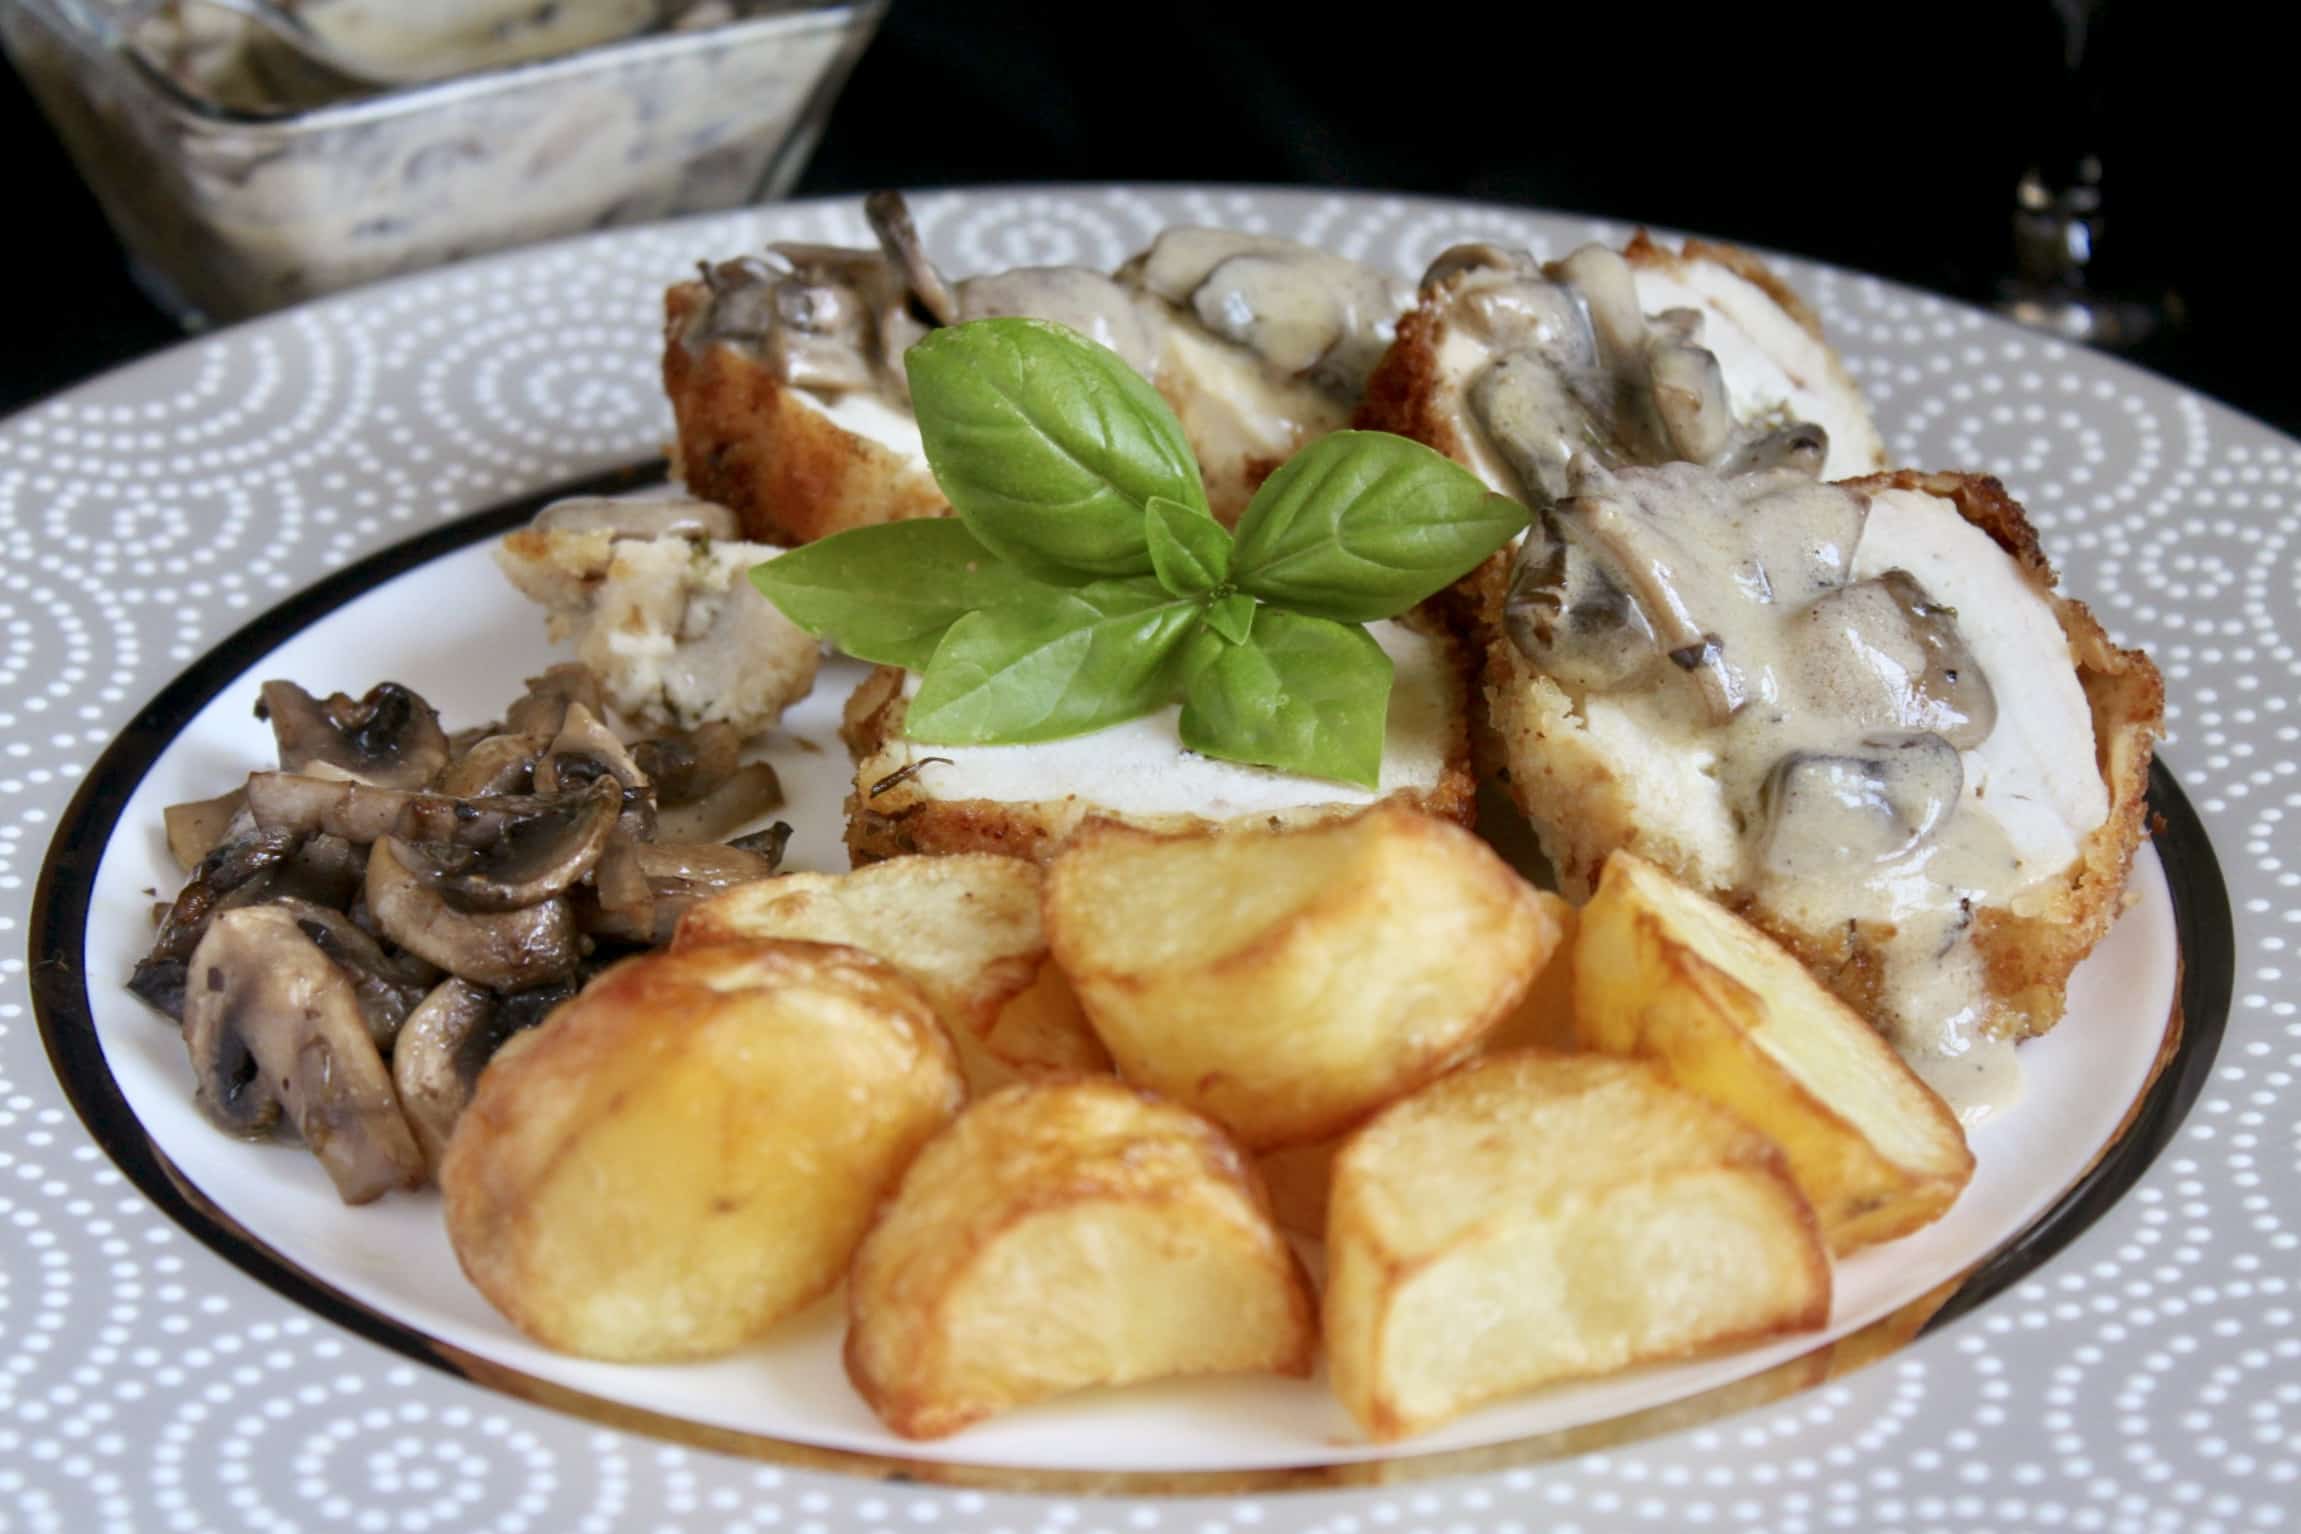 Stuffed Chicken Breast with Goat Cheese and basil and served with mushroom cream sauce and potatoes